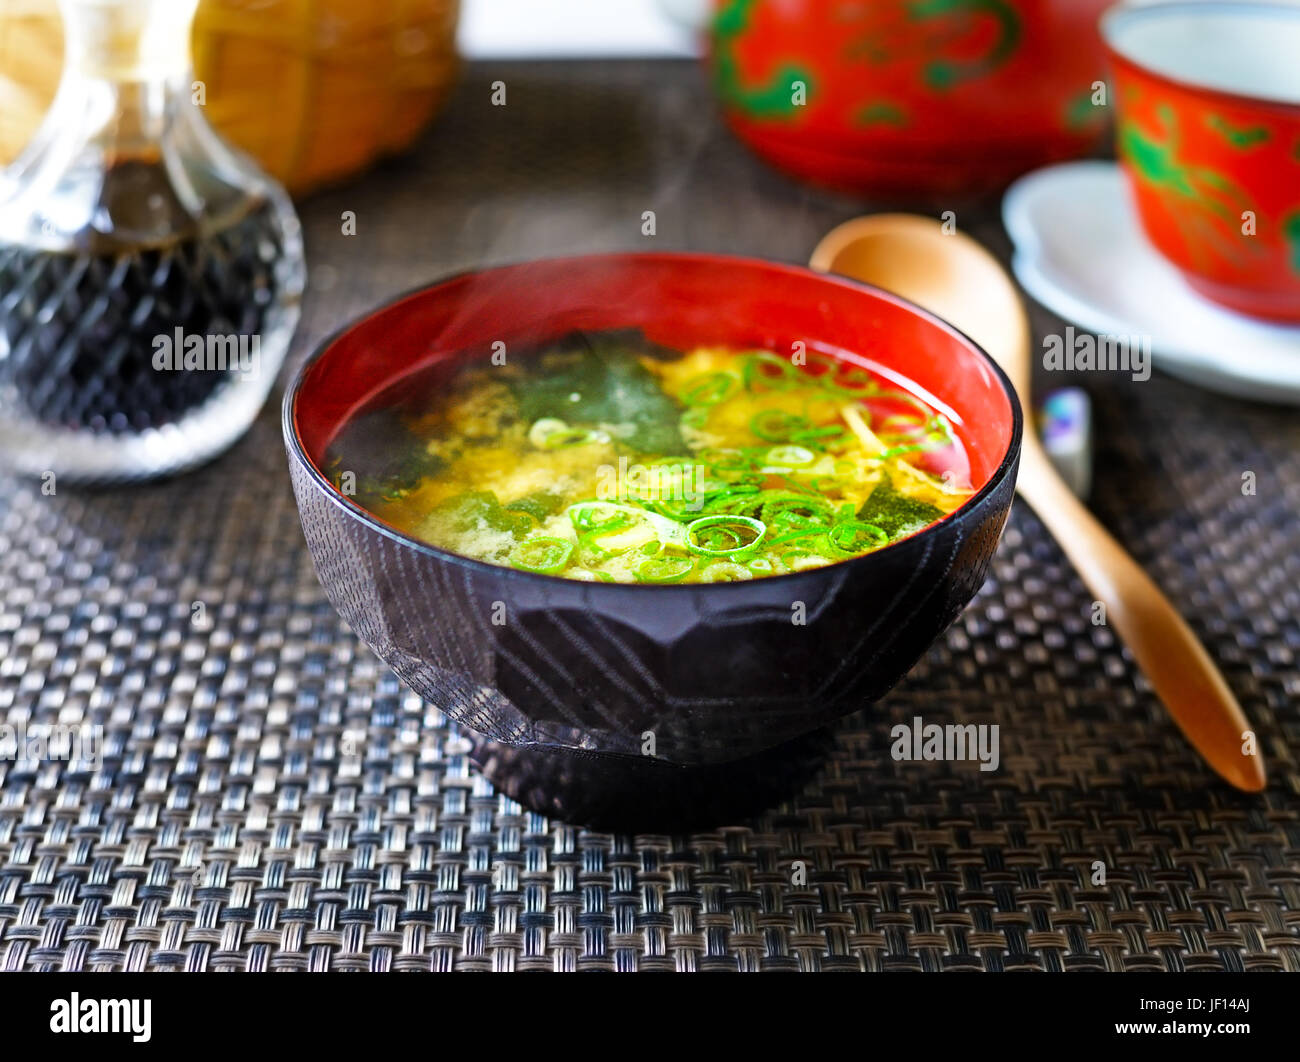 A closeup of a steaming bowl of Japanese miso soup against a dark background. Stock Photo